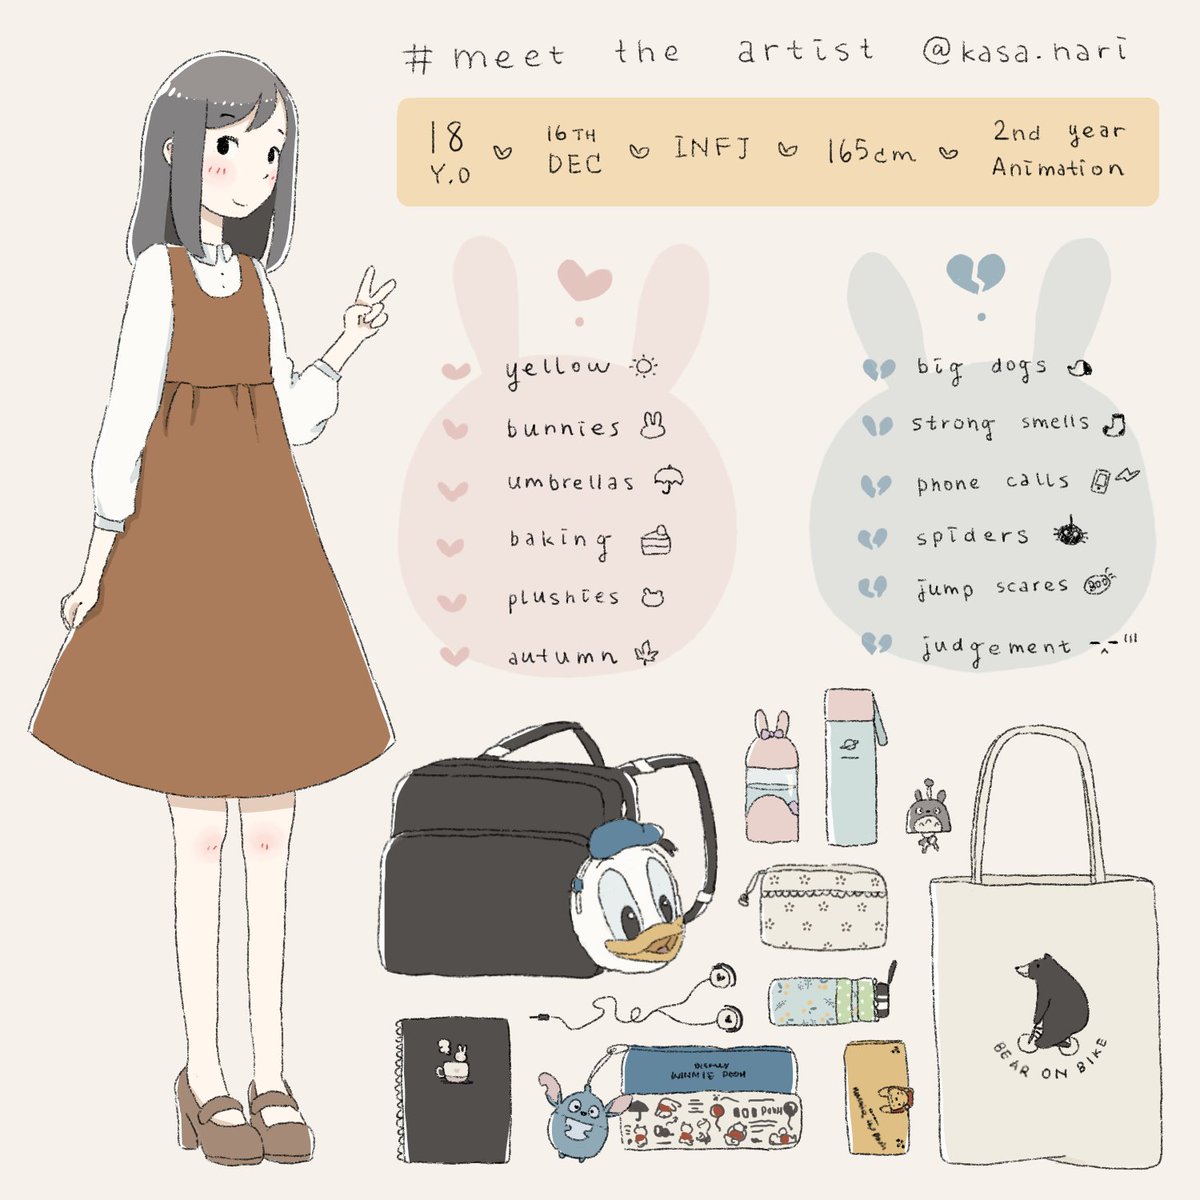 N A R I Hello Everyone This Is Nari I Thought I D Make A Meettheartist Because I Just Realised I Ve Never Done One Before Meettheartist Selfintroduction Whatsinmybag Drawing